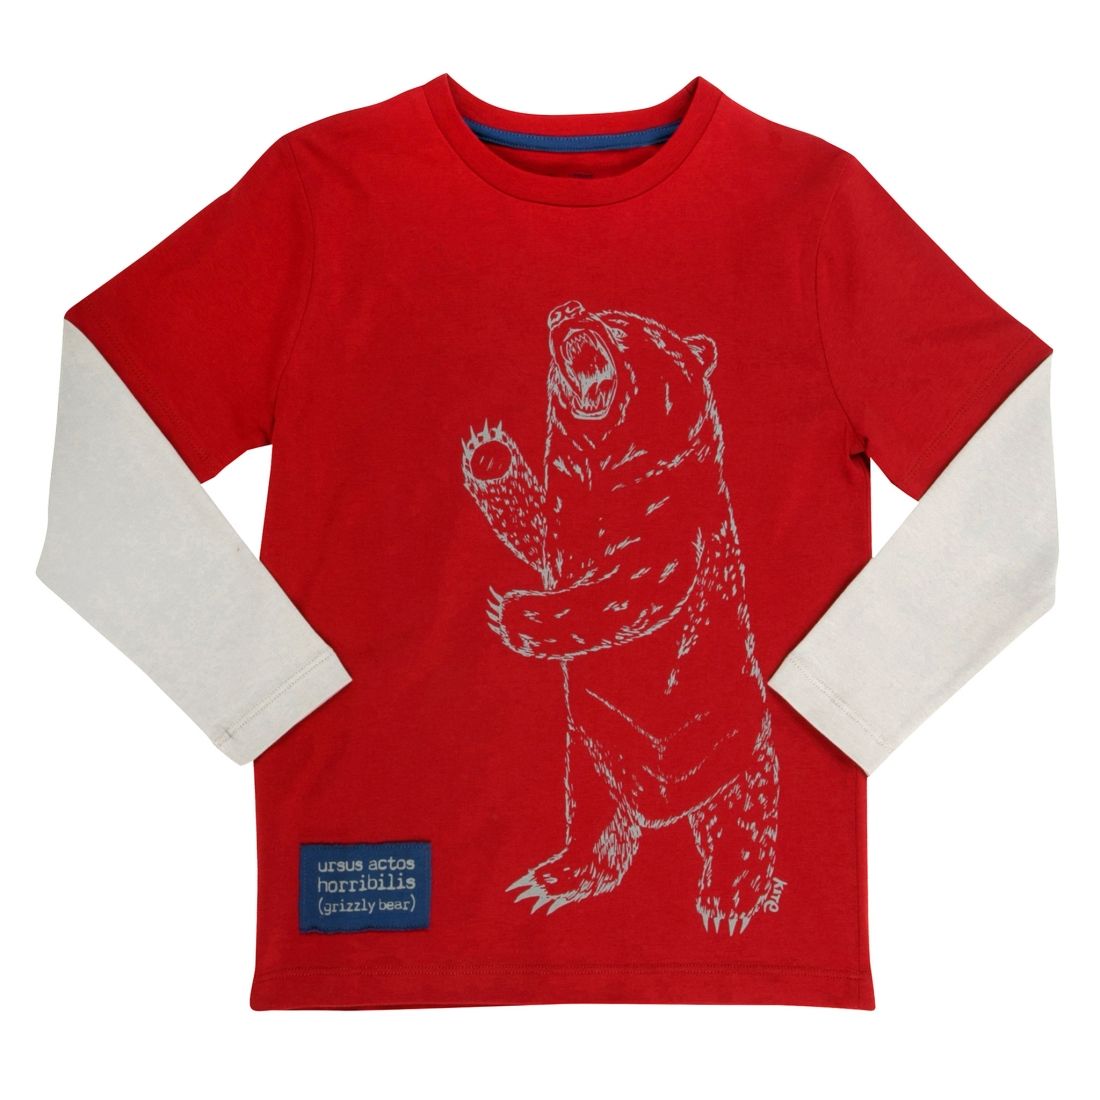 Kite Long Sleeved Tee Shirt Boys Grizzly Bear Red